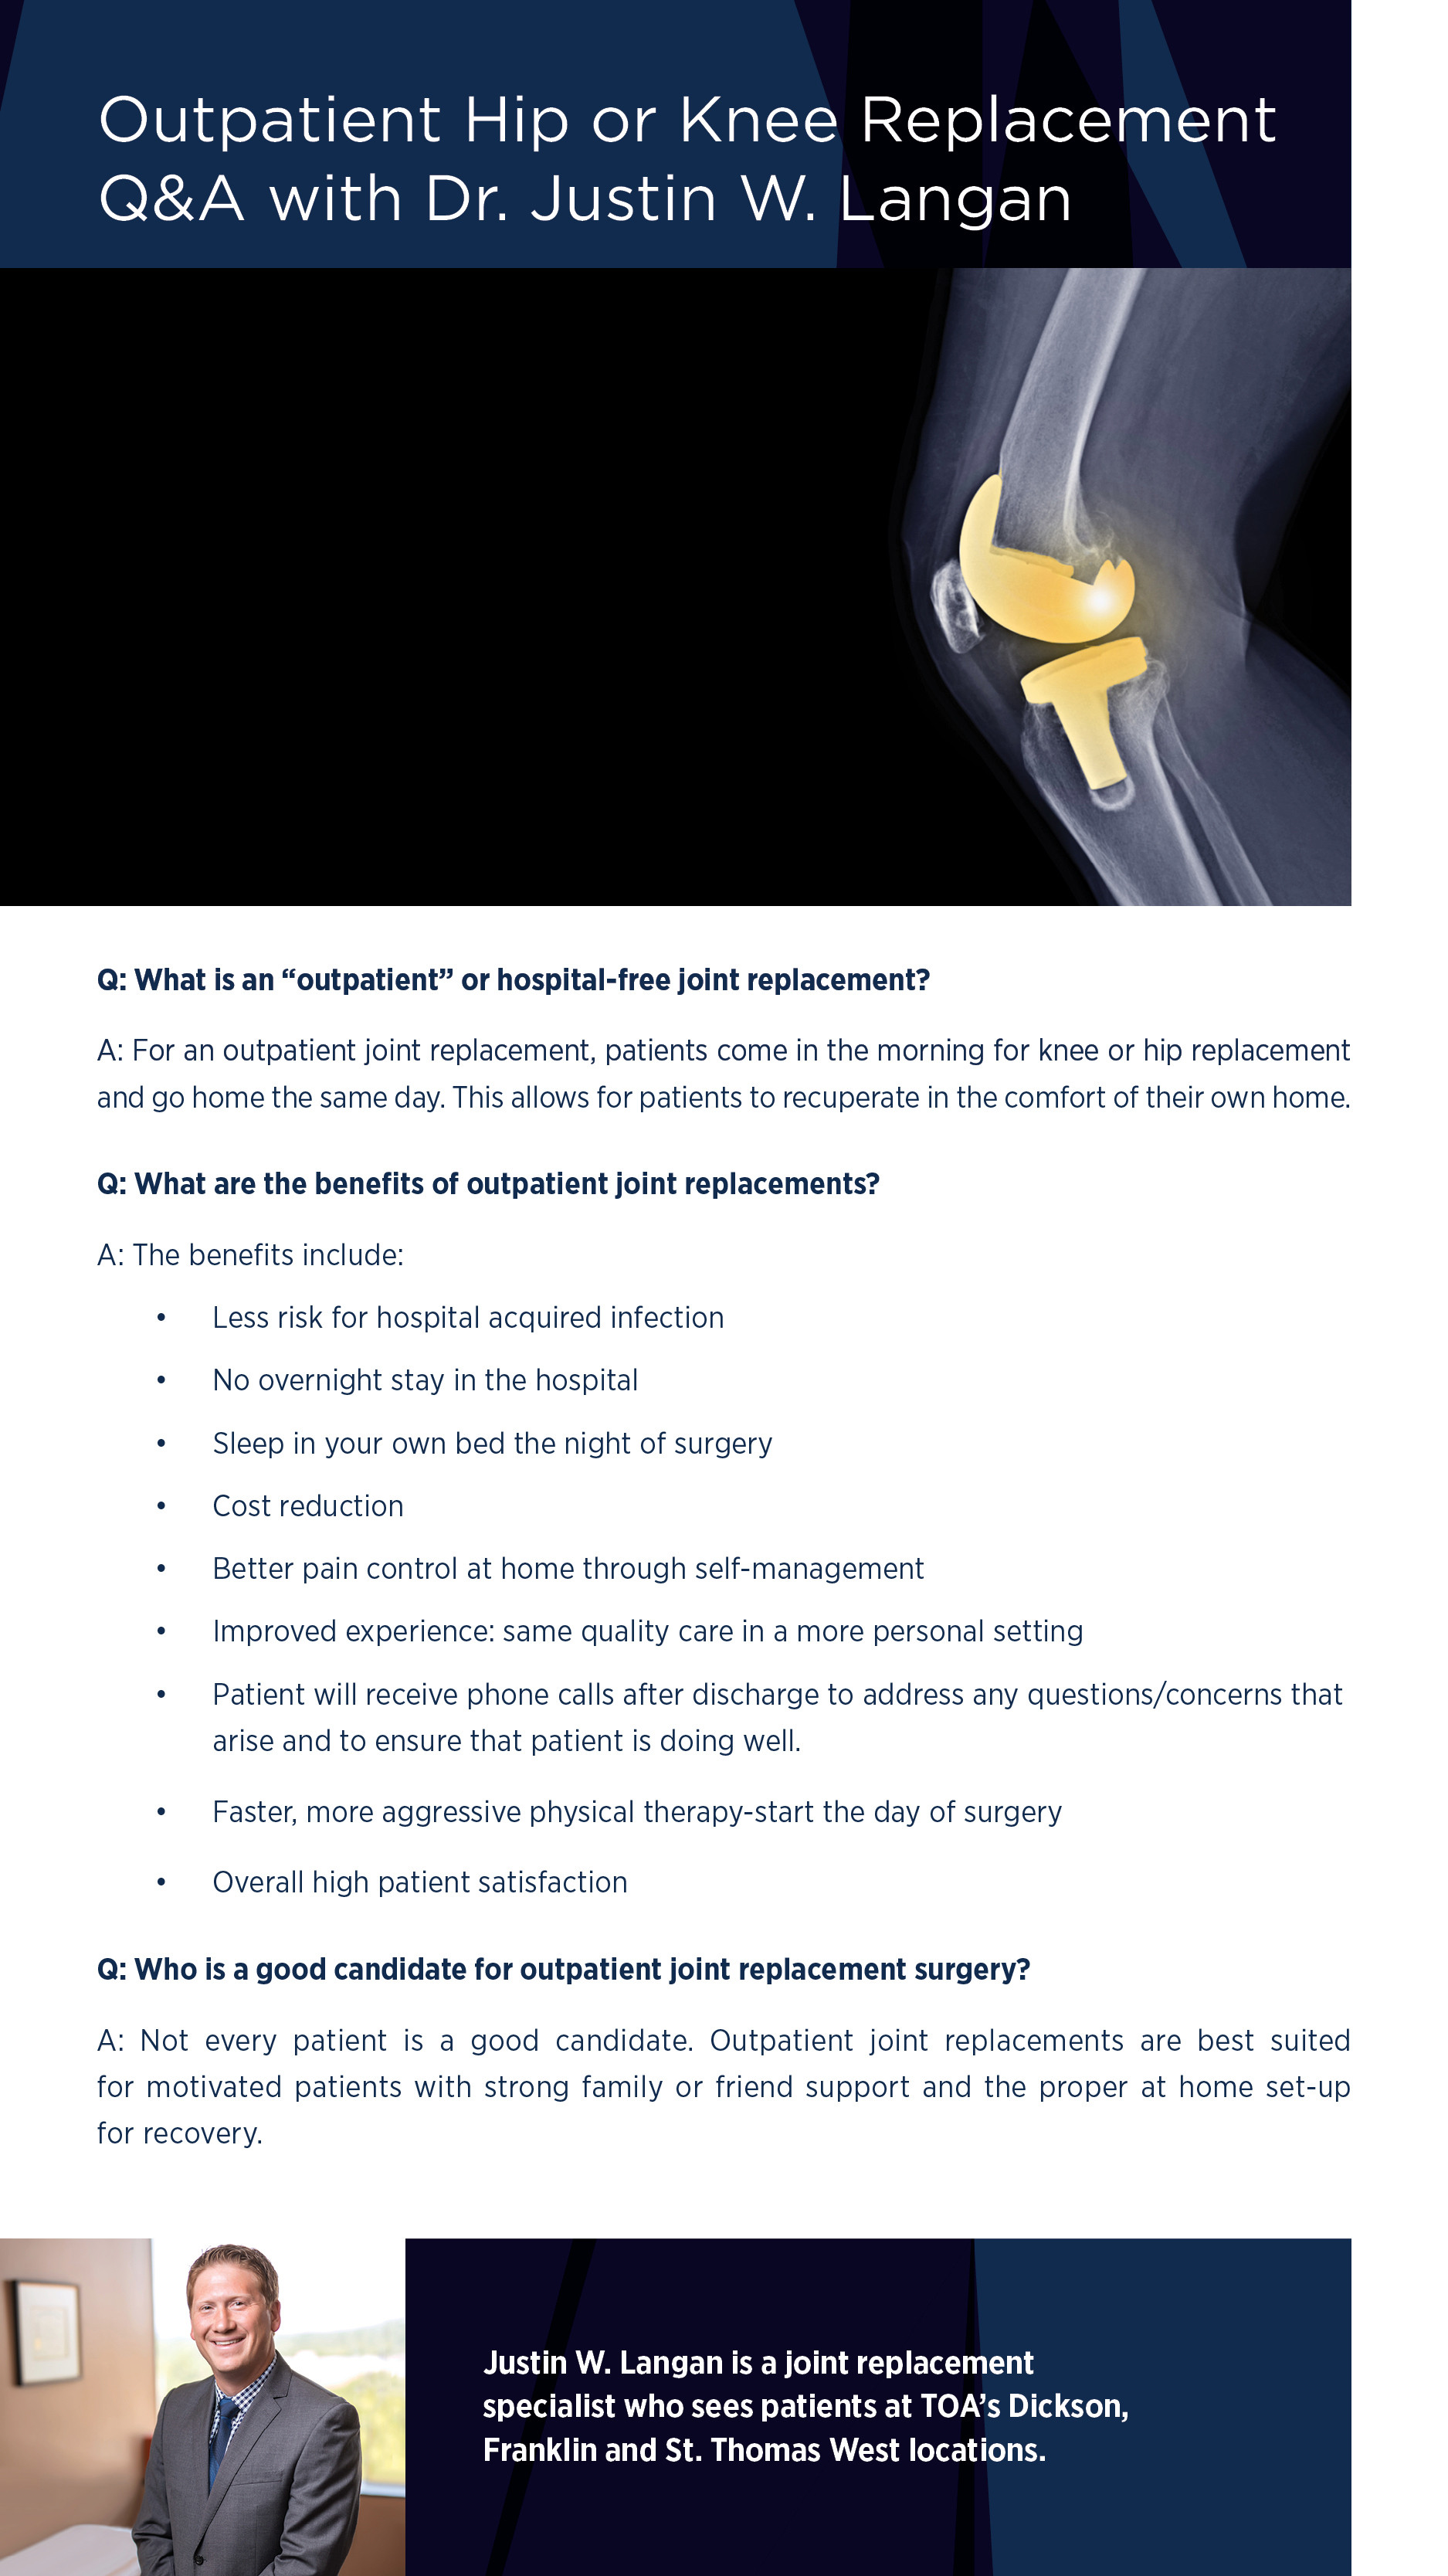 Outpatient Hip & Knee Replacement Q & A with Dr. Justin W. Langan